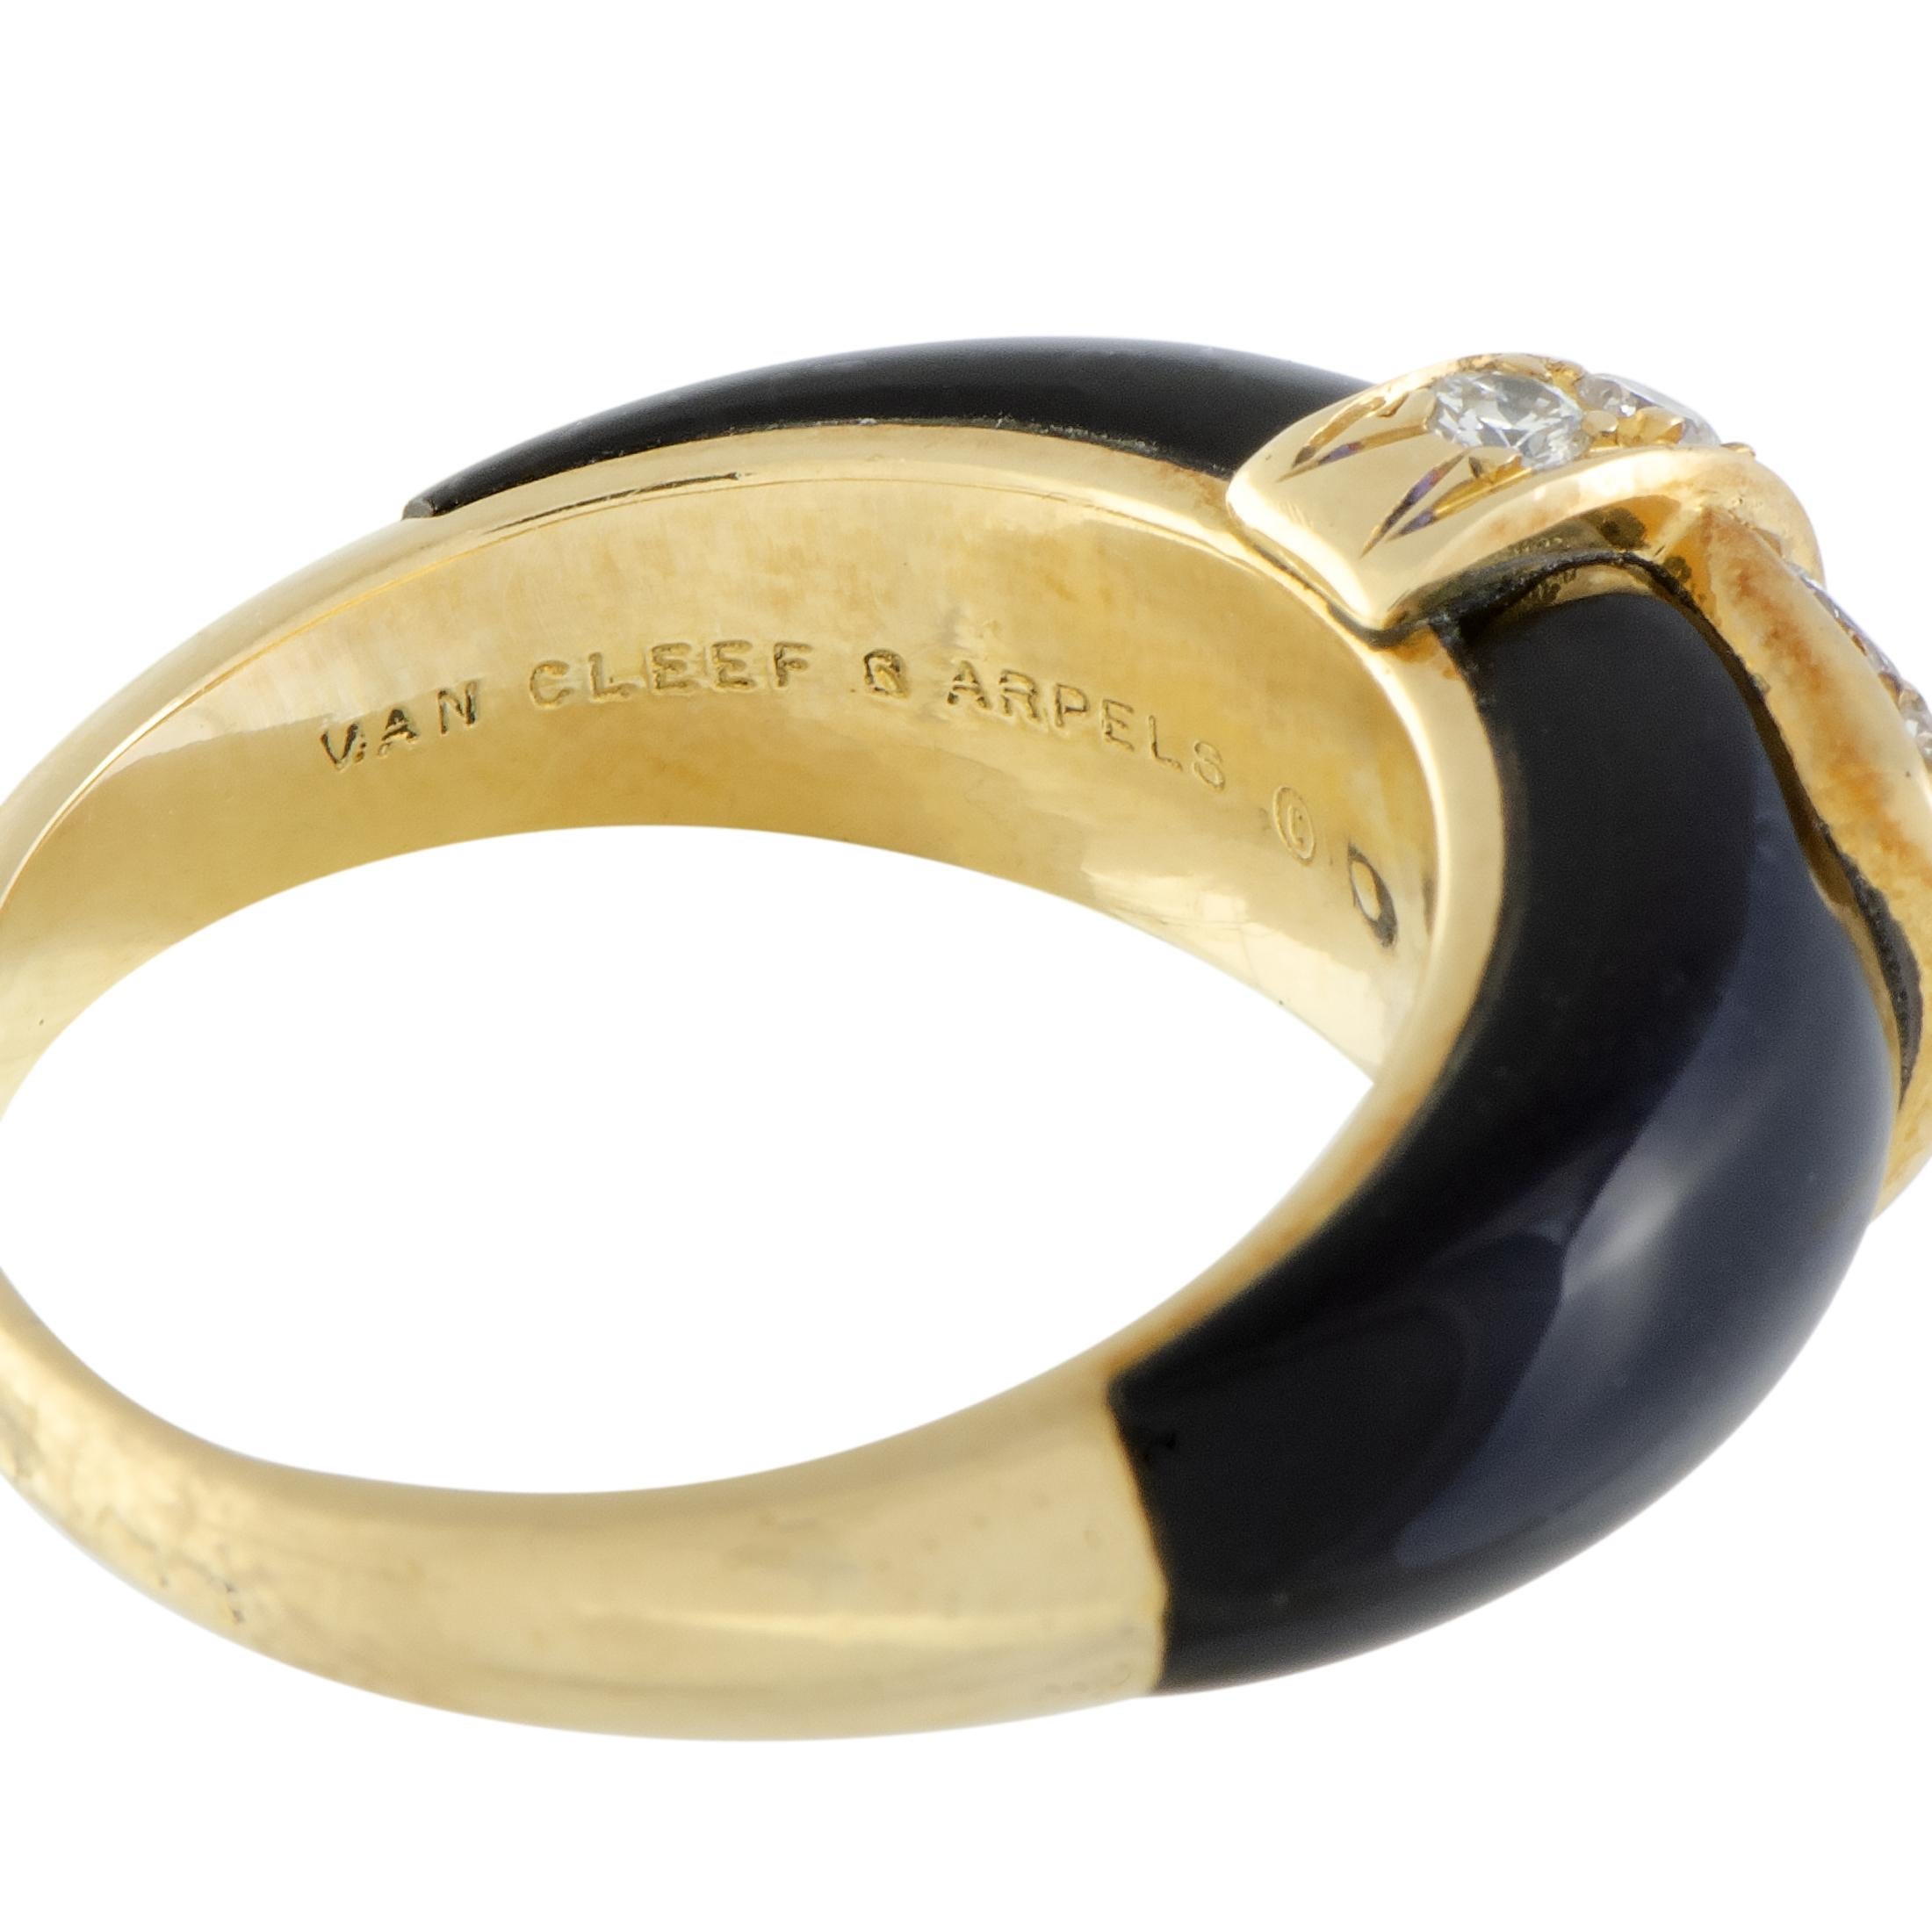 Van Cleef & Arpels Yellow Gold Diamond Pave and Onyx Band Ring 1